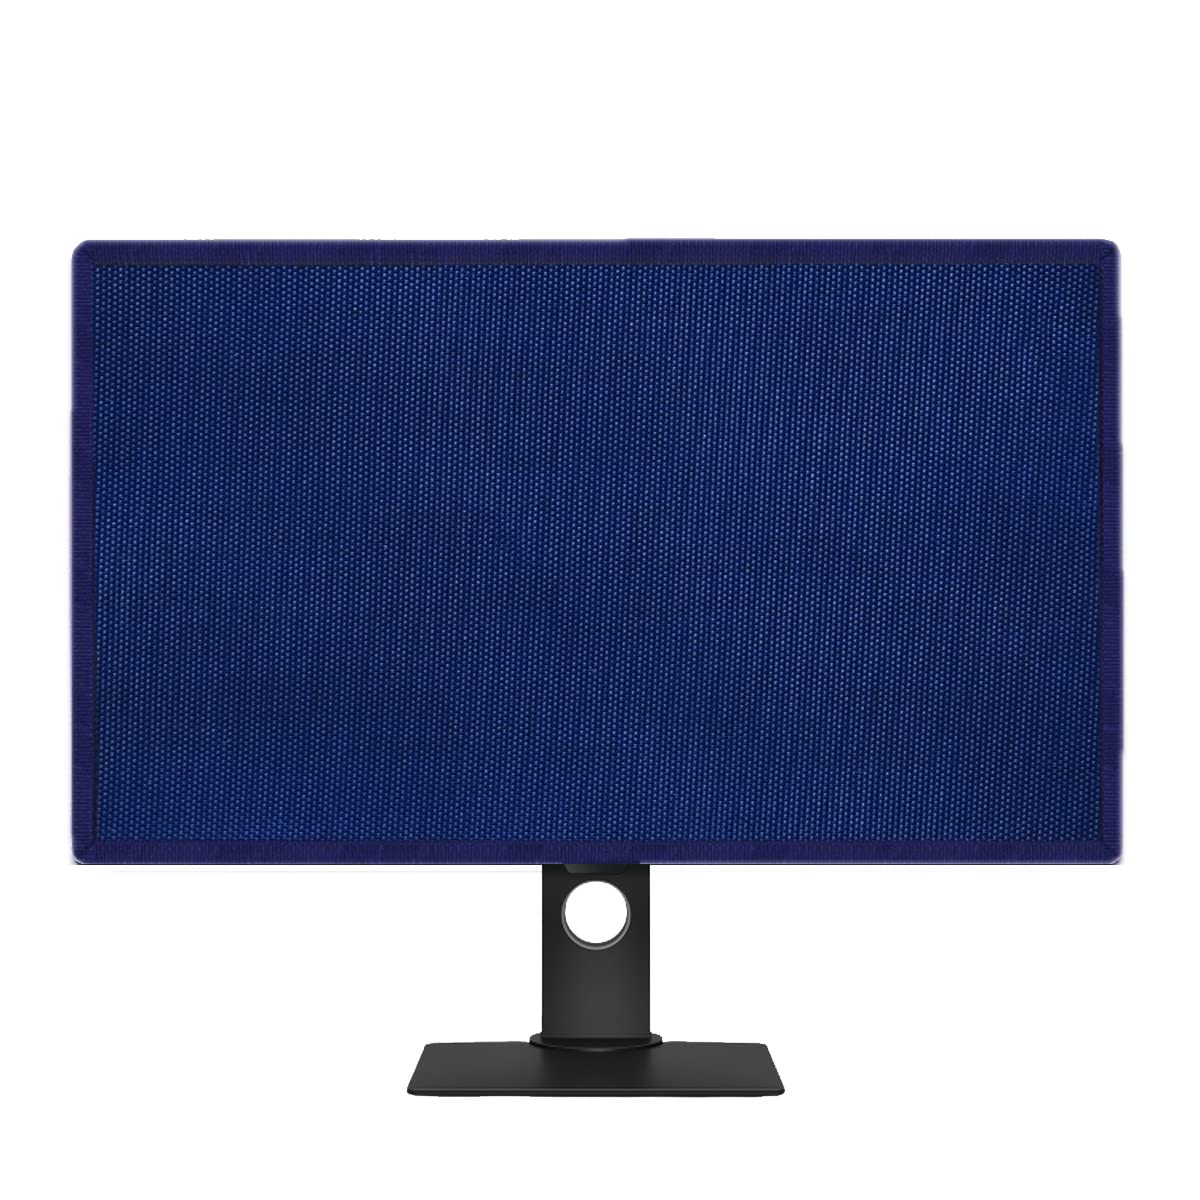 PalaP Dust Proof Monitor Cover for BENQ 23.5 inches Monitor